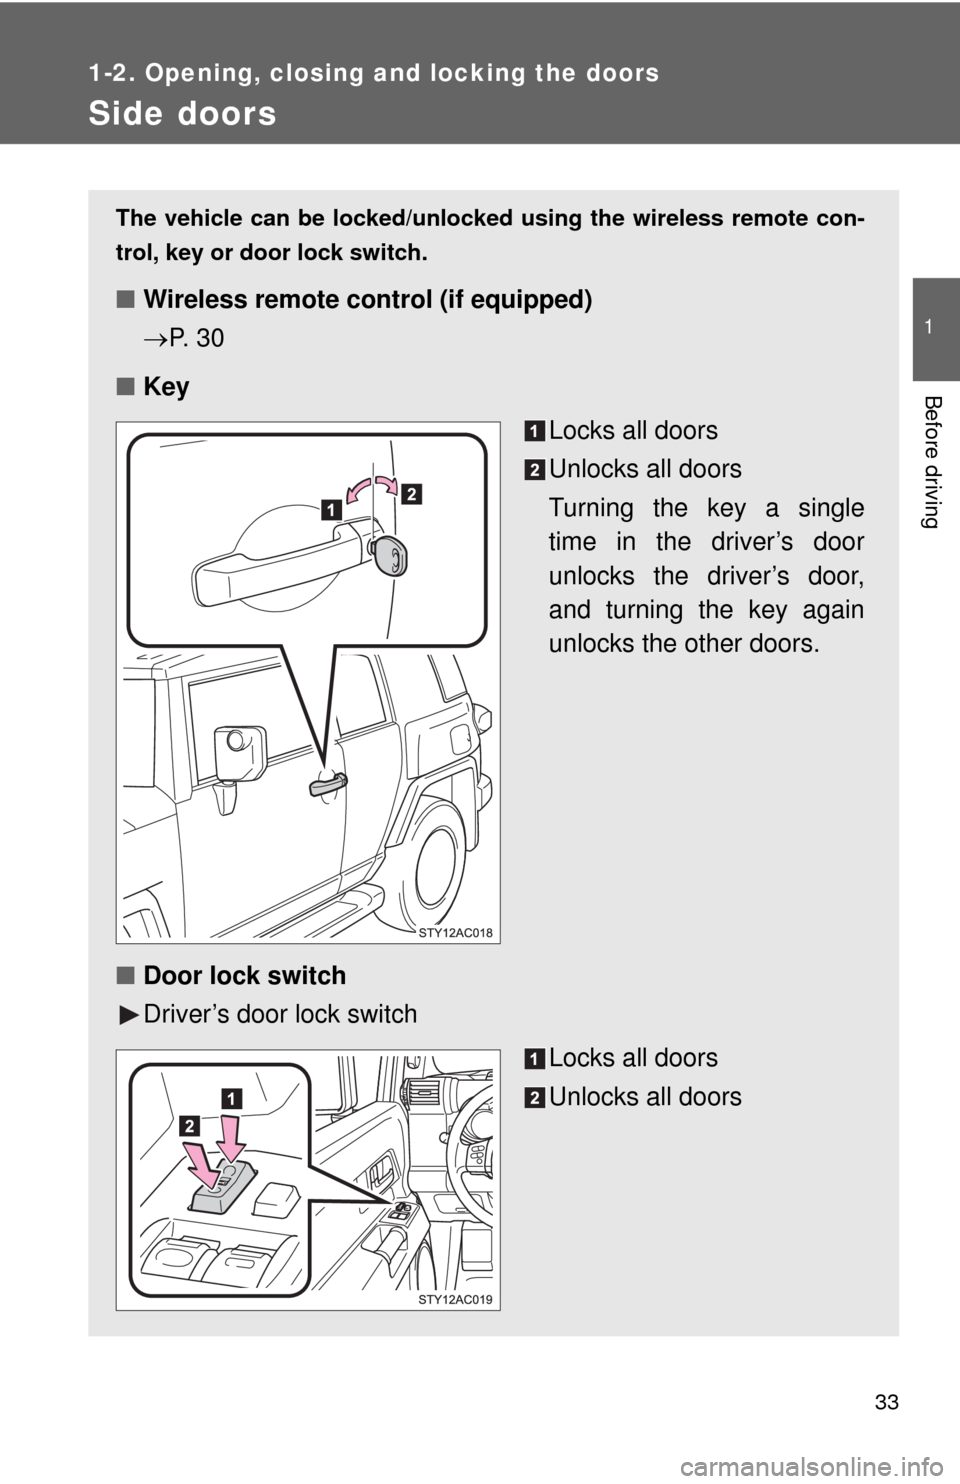 TOYOTA FJ CRUISER 2010 1.G Owners Manual 33
1
1-2. Opening, closing and locking the doors
Before driving
Side doors
The vehicle can be locked/unlocked using the wireless remote con-
trol, key or door lock switch.
■Wireless remote control (